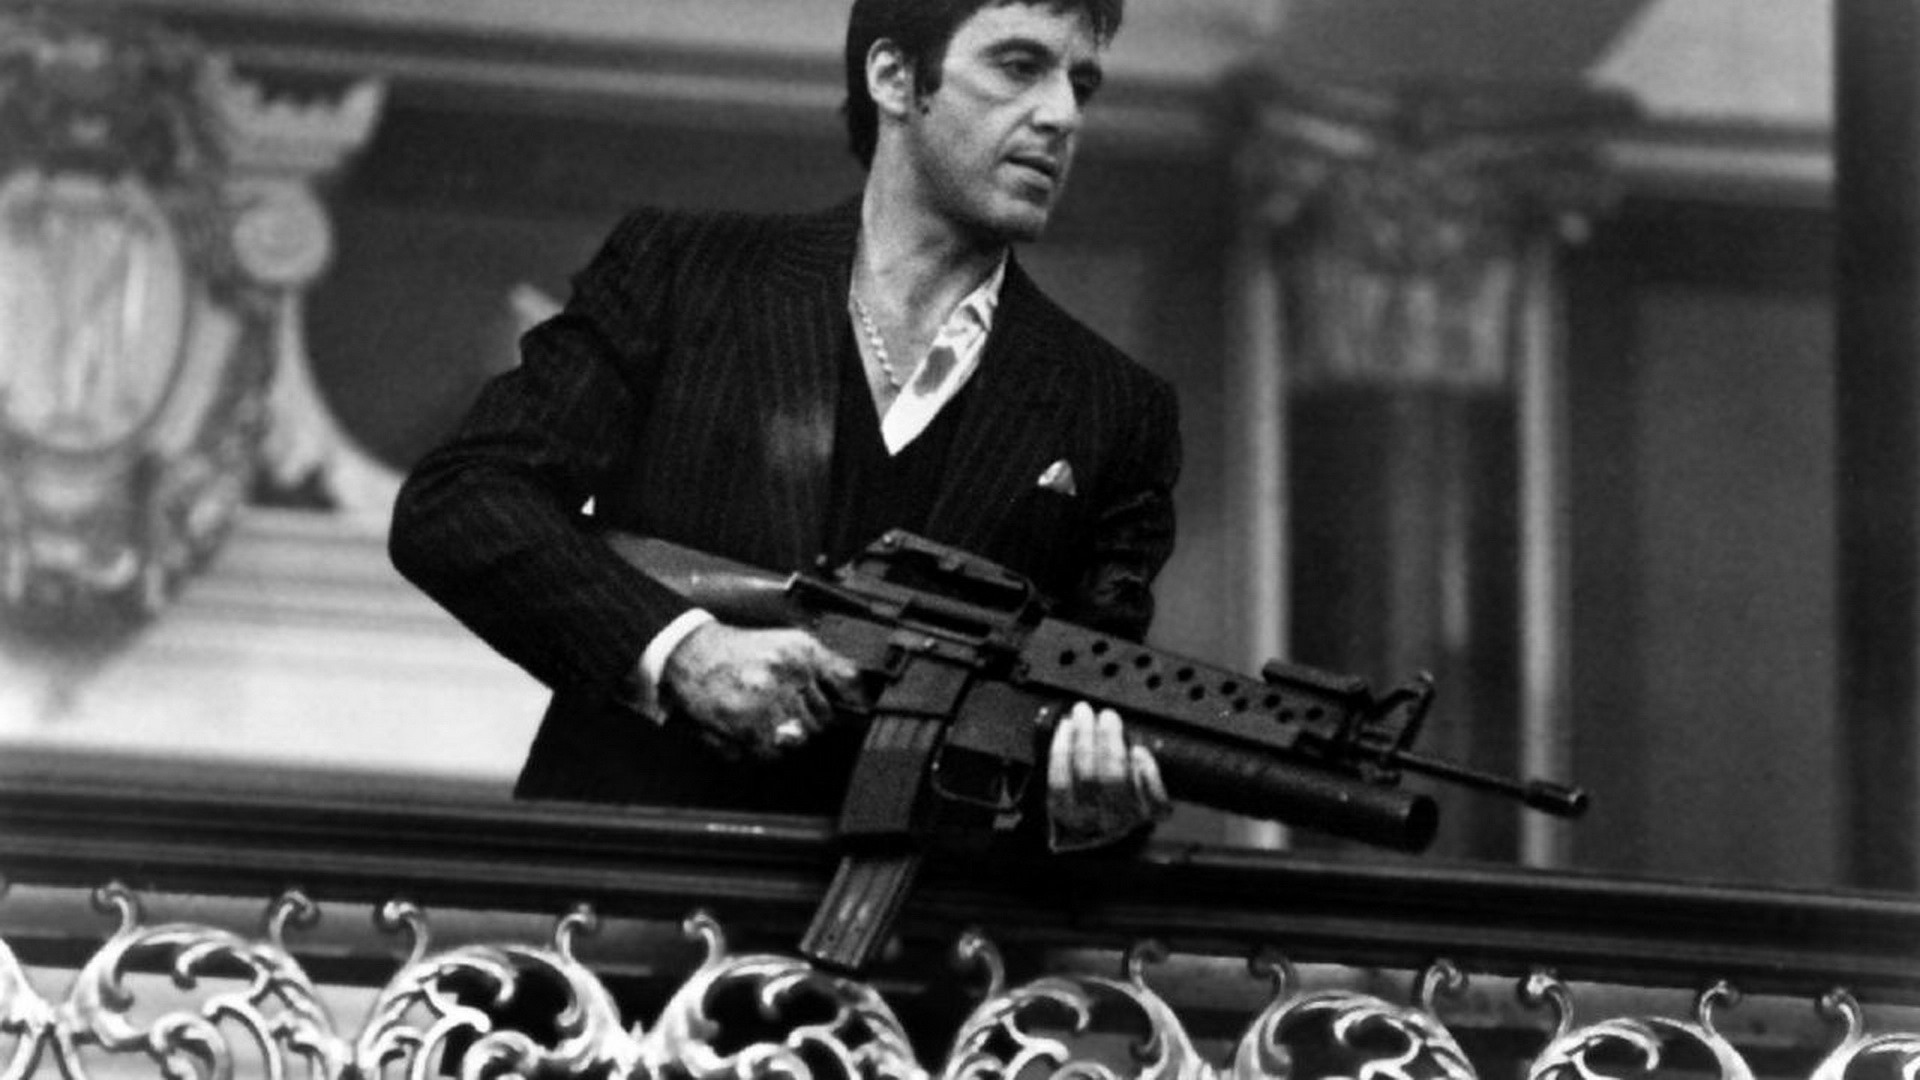 scarface download for pc